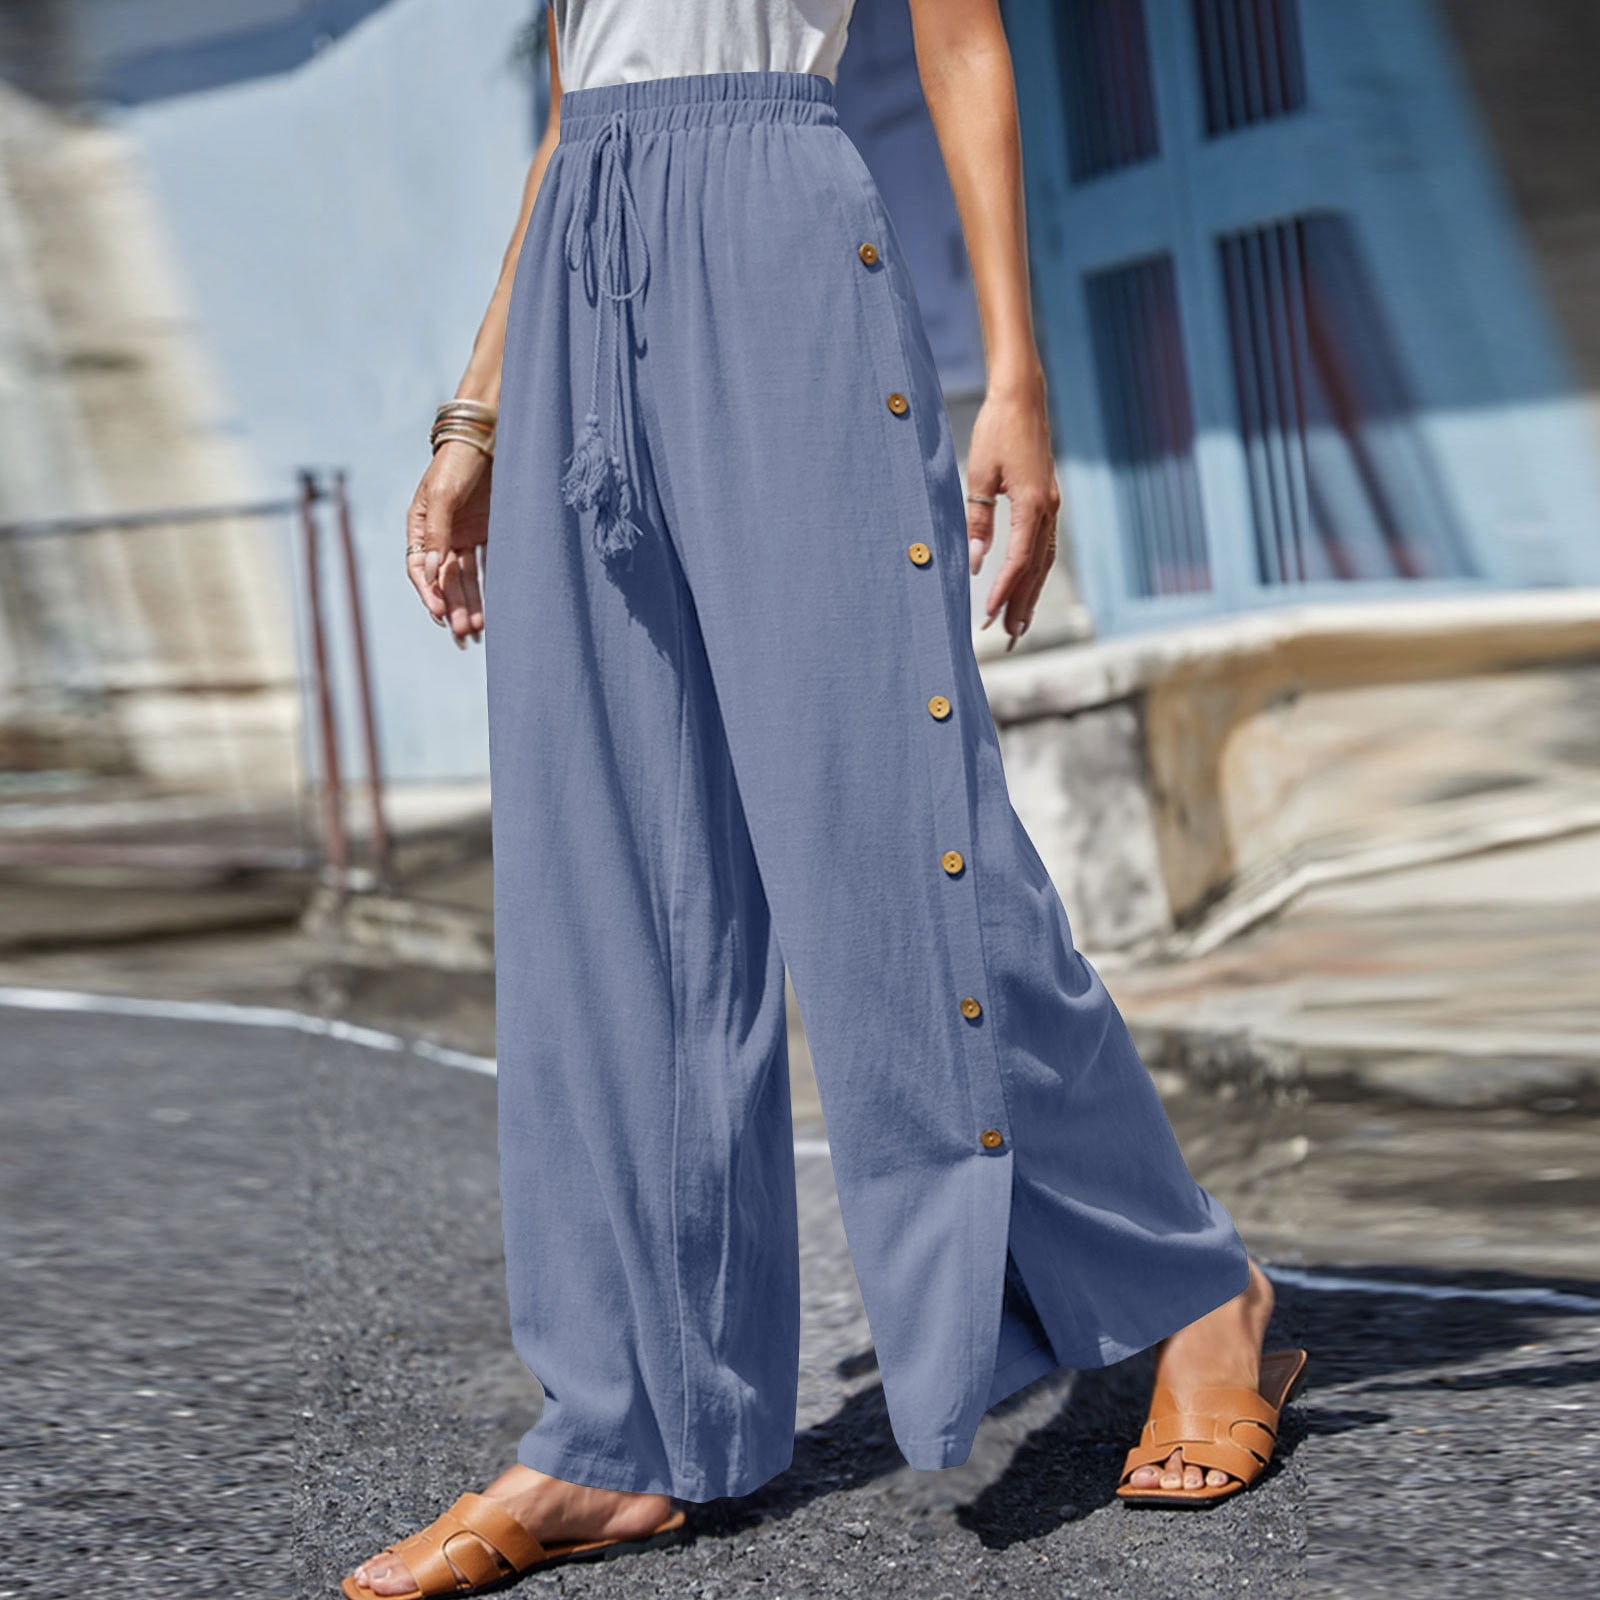 Gaecuw Linen Pants for Women Summer Palazzo Pants Relaxed Fit Long Pants  Lounge Trousers Strappy Sweatpants Casual Loose Baggy Pants High Waisted